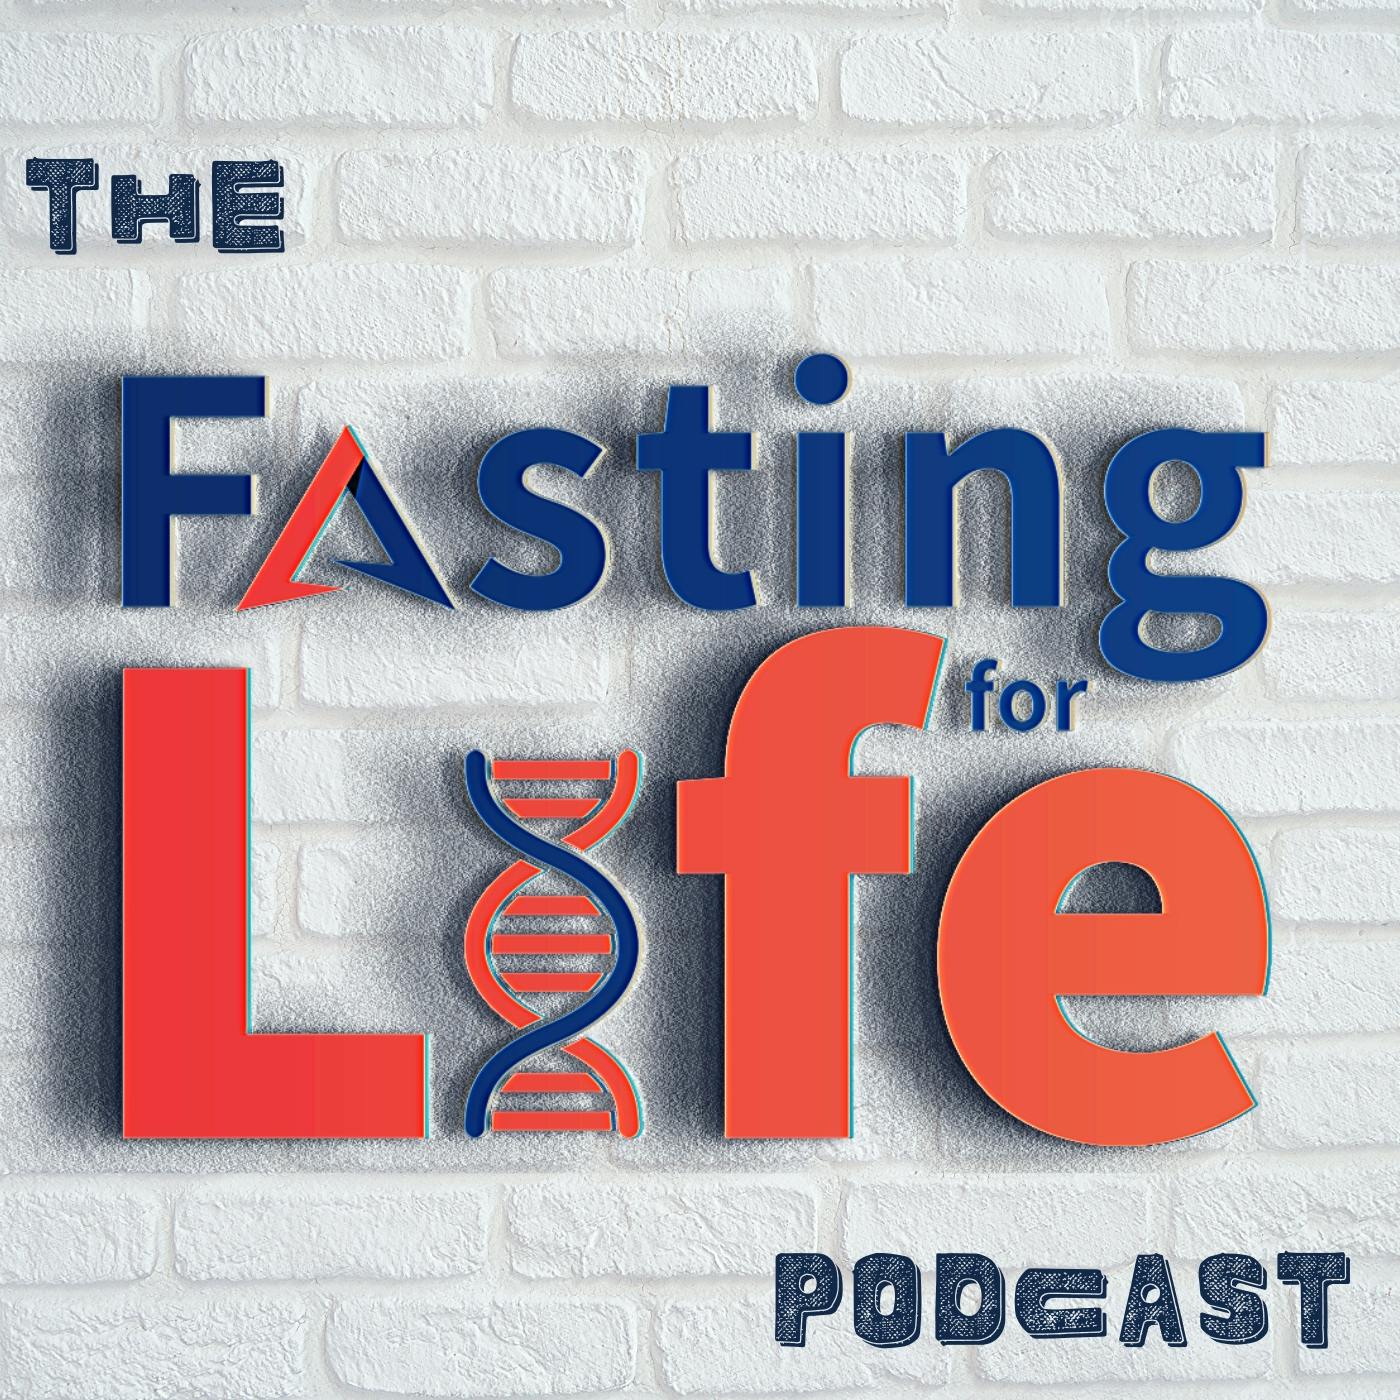 Ep. 77 - Should I take a Walk after Dinner? | Lowering Blood Sugar & Insulin with Exercise | Preventing Diabetes & Obesity, Avoiding Perfectionism | Free Intermittent Fasting Plan for OMAD One Meal a 